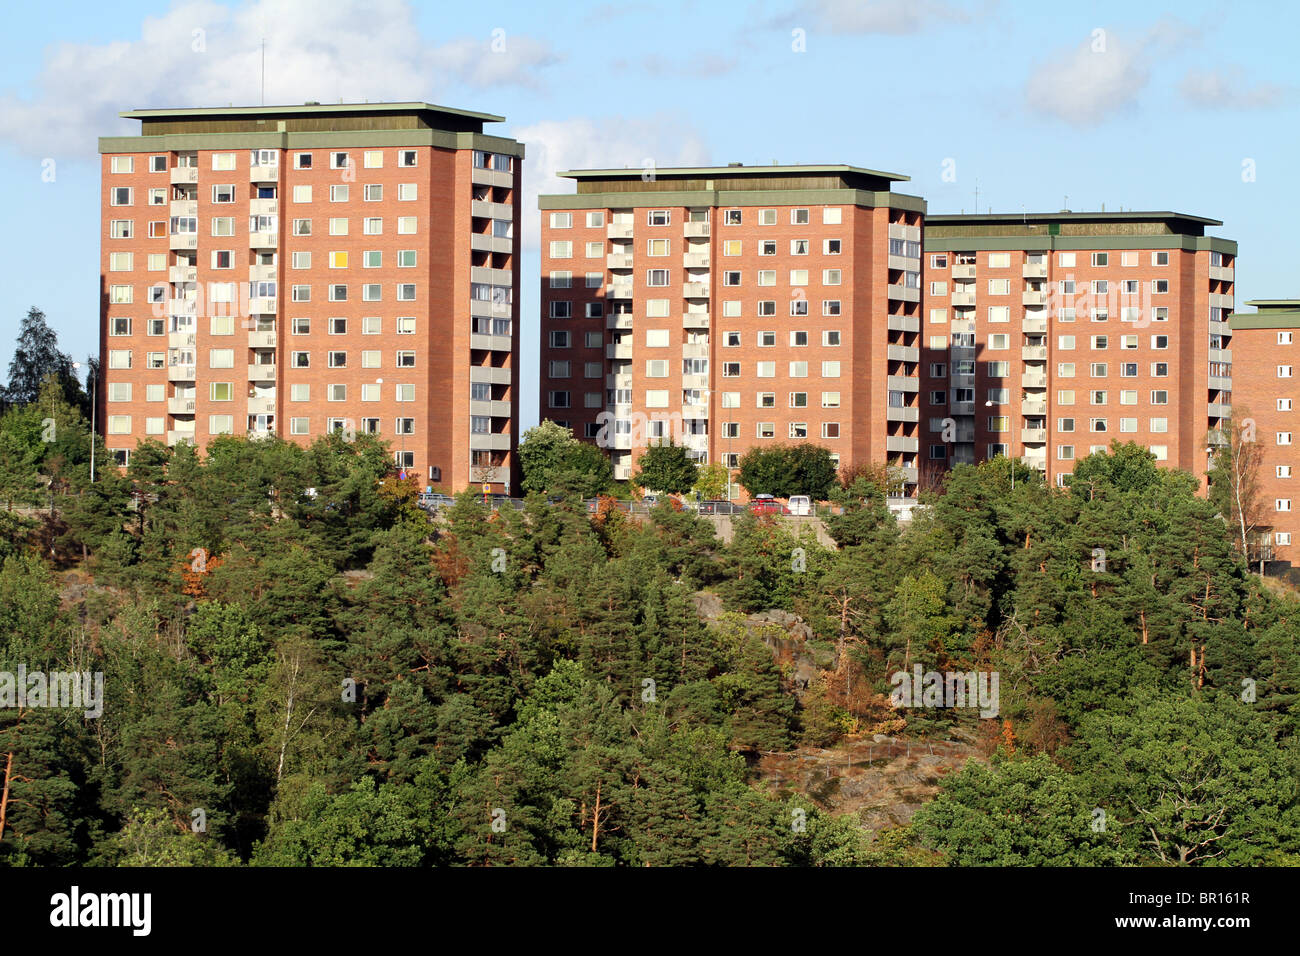 Blocks of flats and housing in Stockholm, Sweden Stock Photo